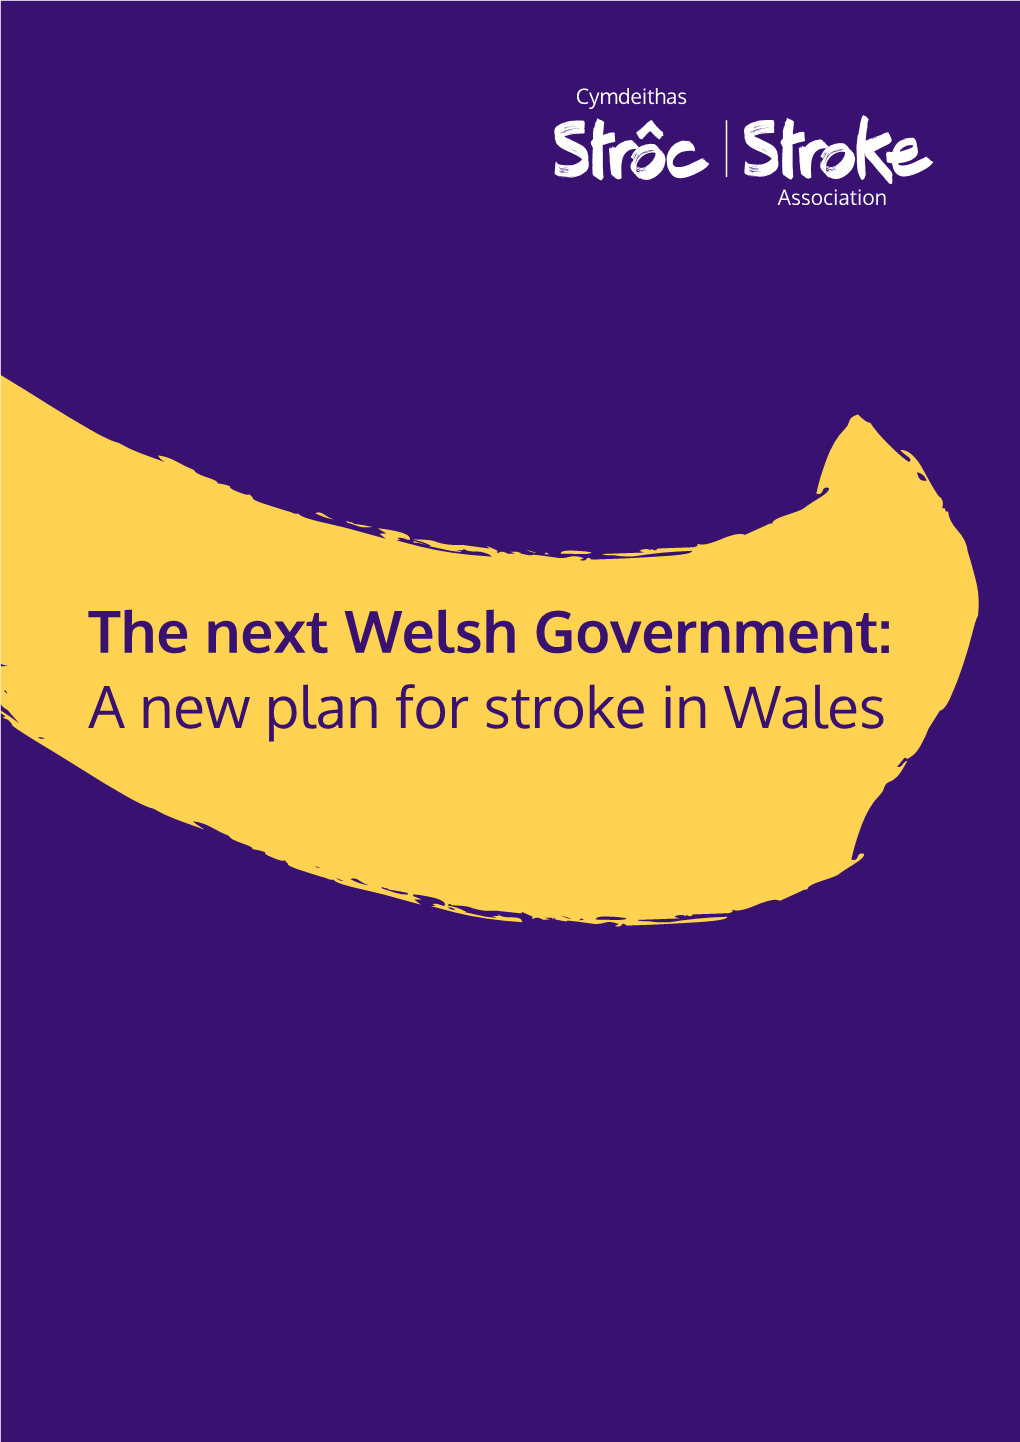 The Next Welsh Government: a New Plan for Stroke in Wales Wales Must Not Fall Behind the Rest of the UK When It Comes to Stroke Care